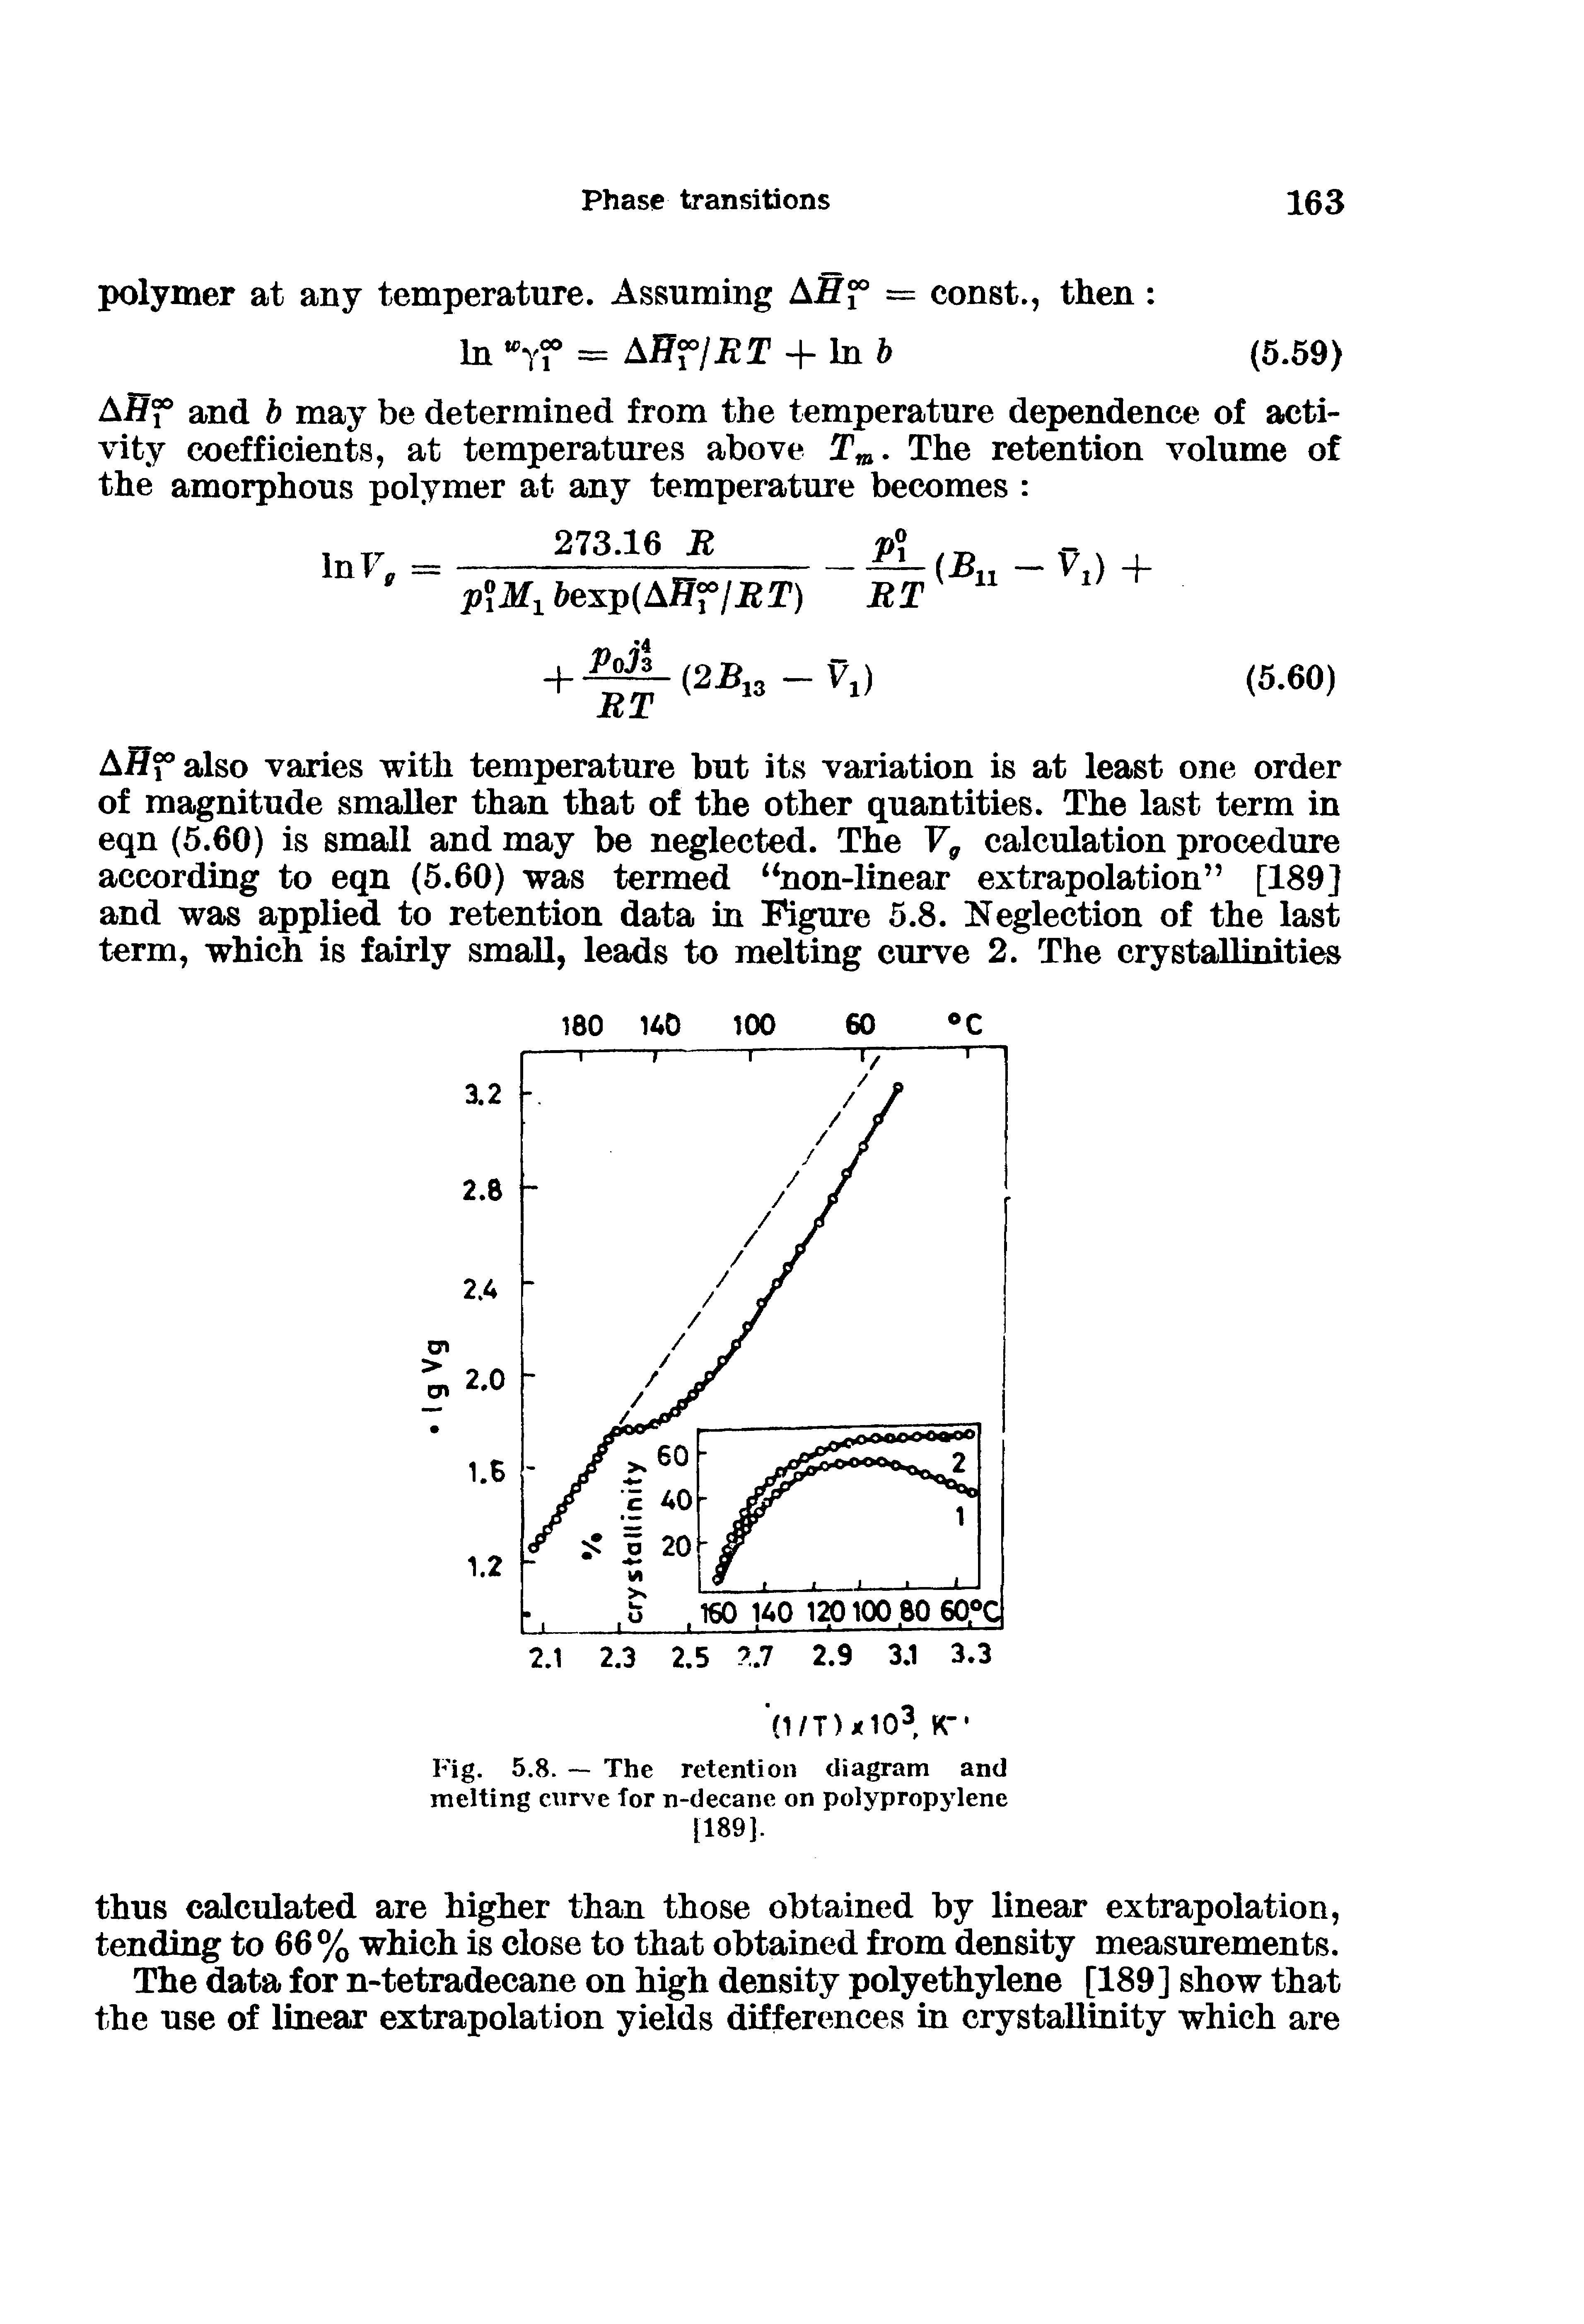 Fig. 5.8. — The retention diagram and melting curve for n-decane on polypropylene [189],...